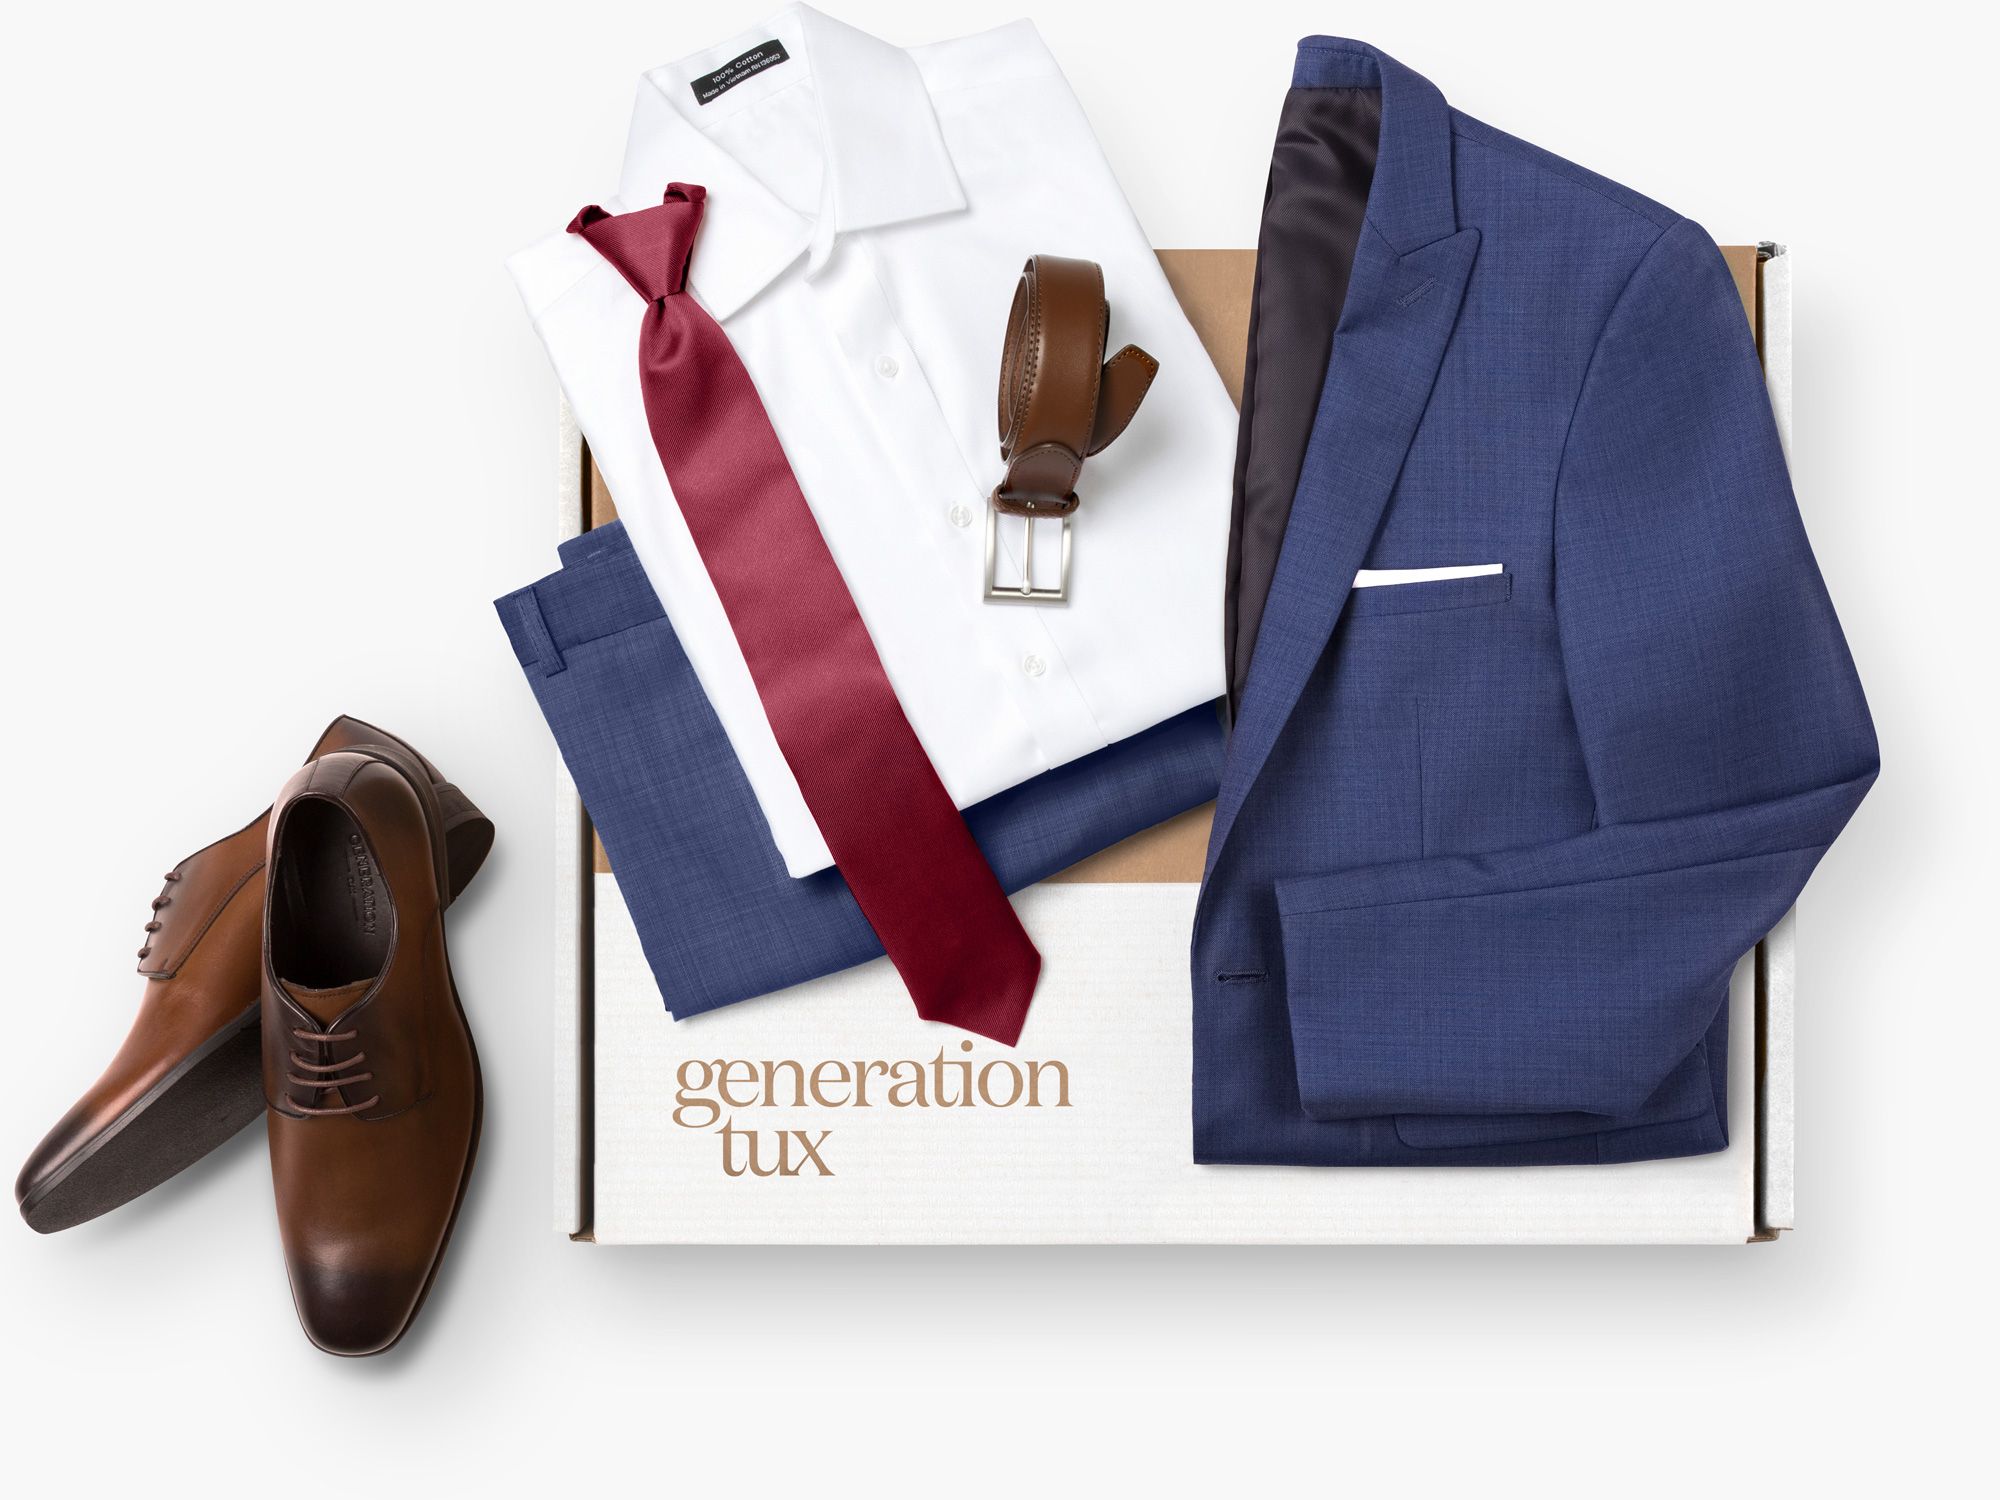 Generation Tux online suit rental with accessories and box delivery.